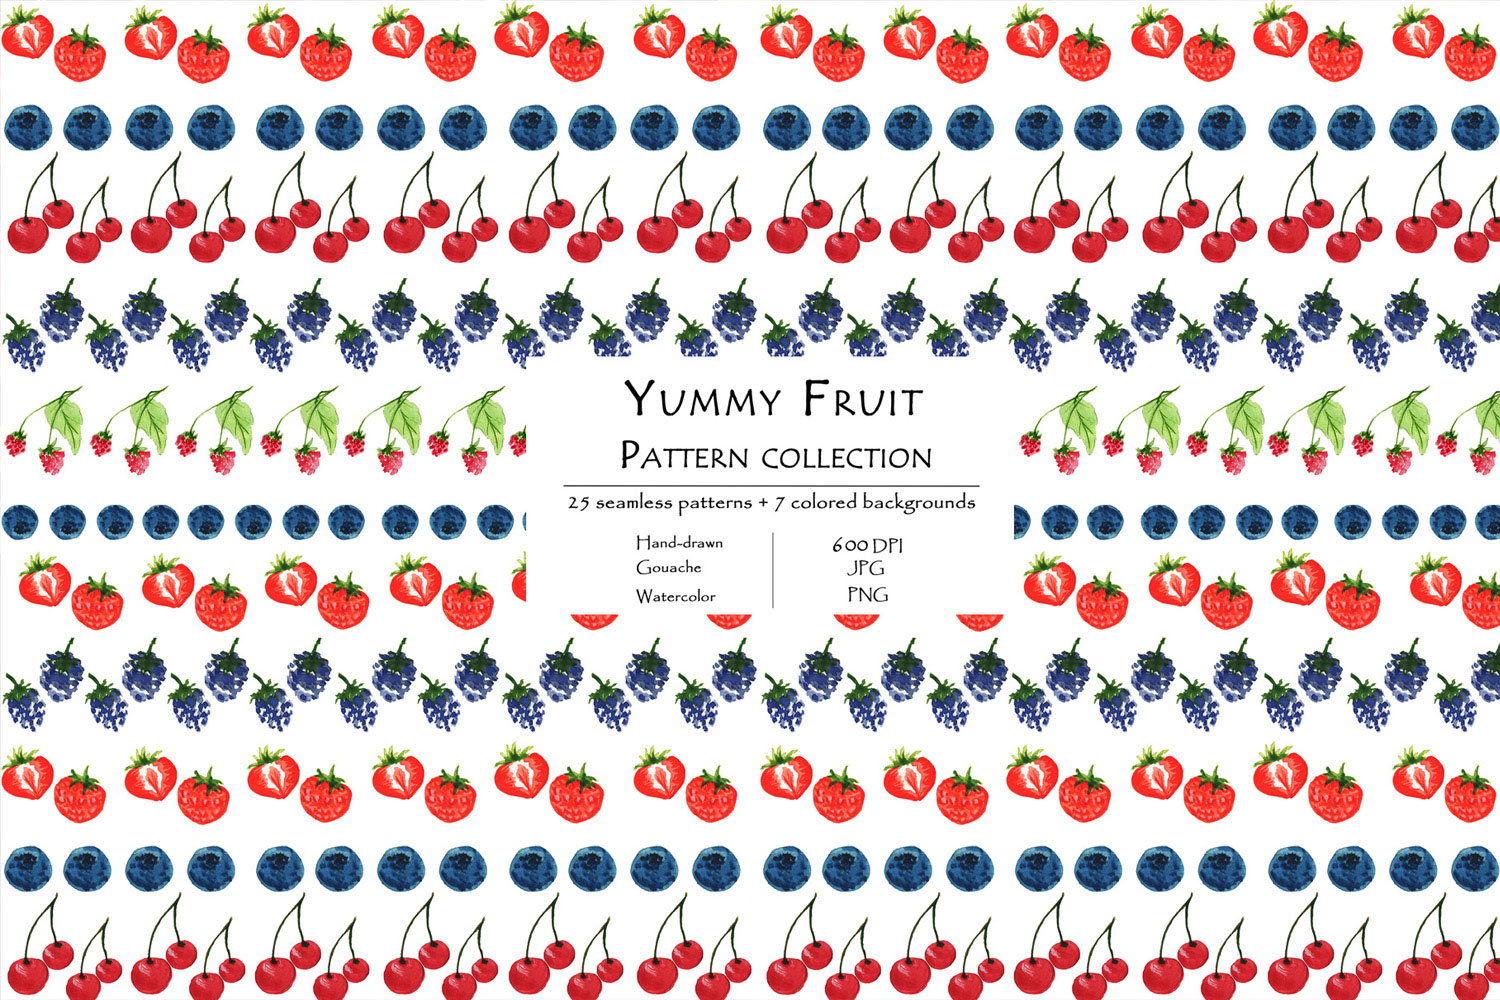 Yummy Fruit Pattern Collection With 25 Seamless Patterns And 7 Backgrounds Berries Variations.